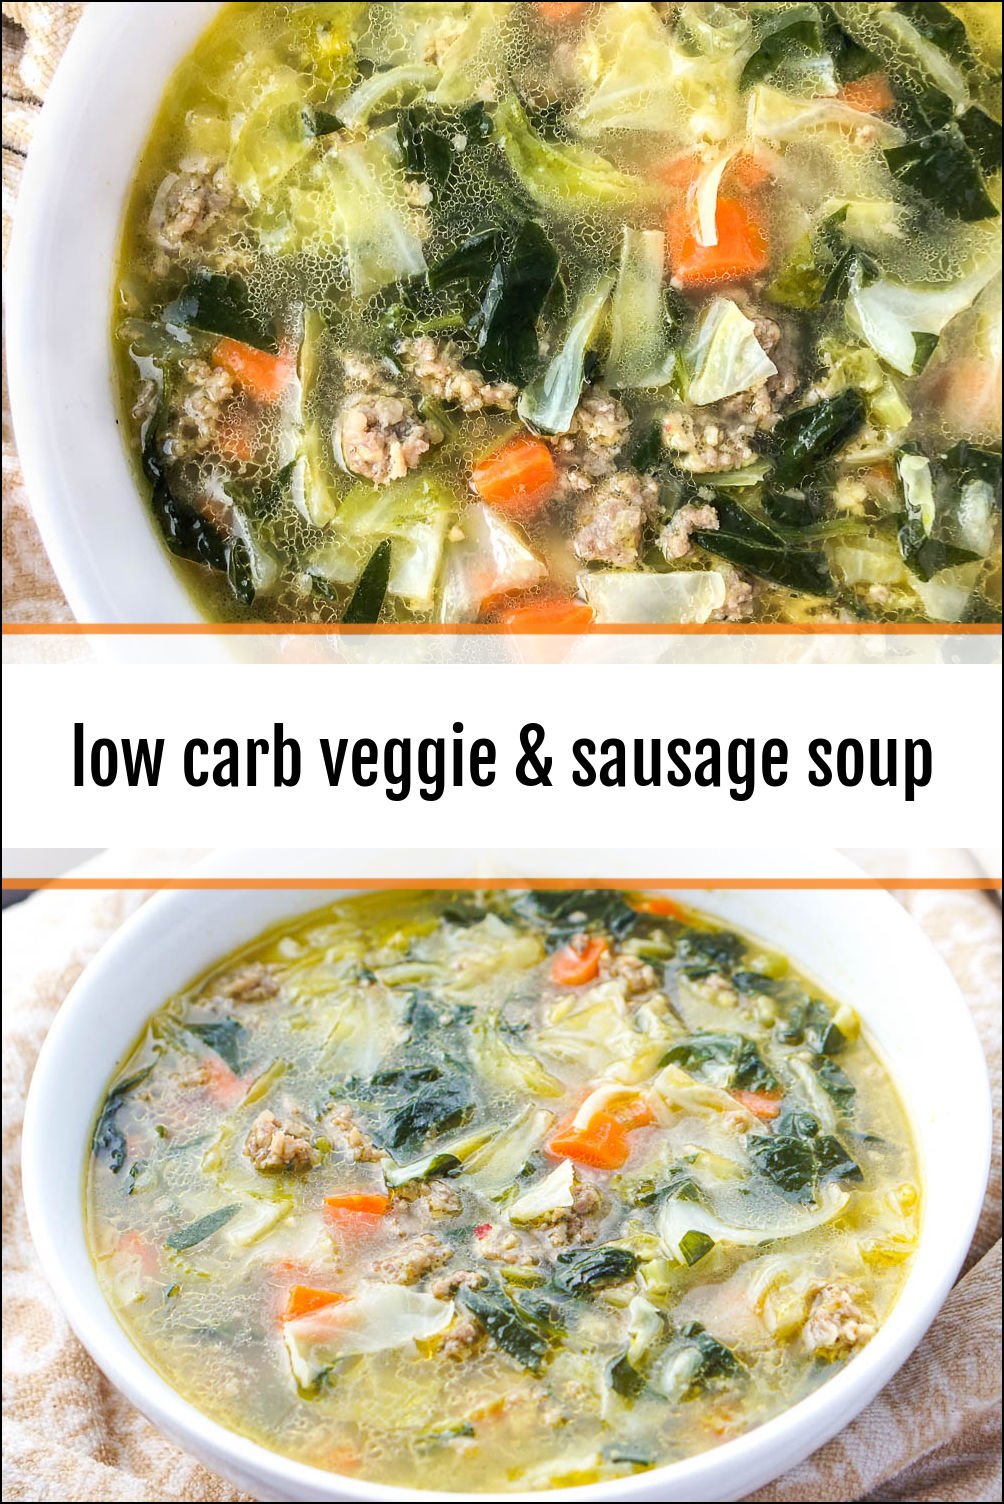 Keto Vegetable Sausage Soup Recipe with Hearty Low Carb Vegetables!